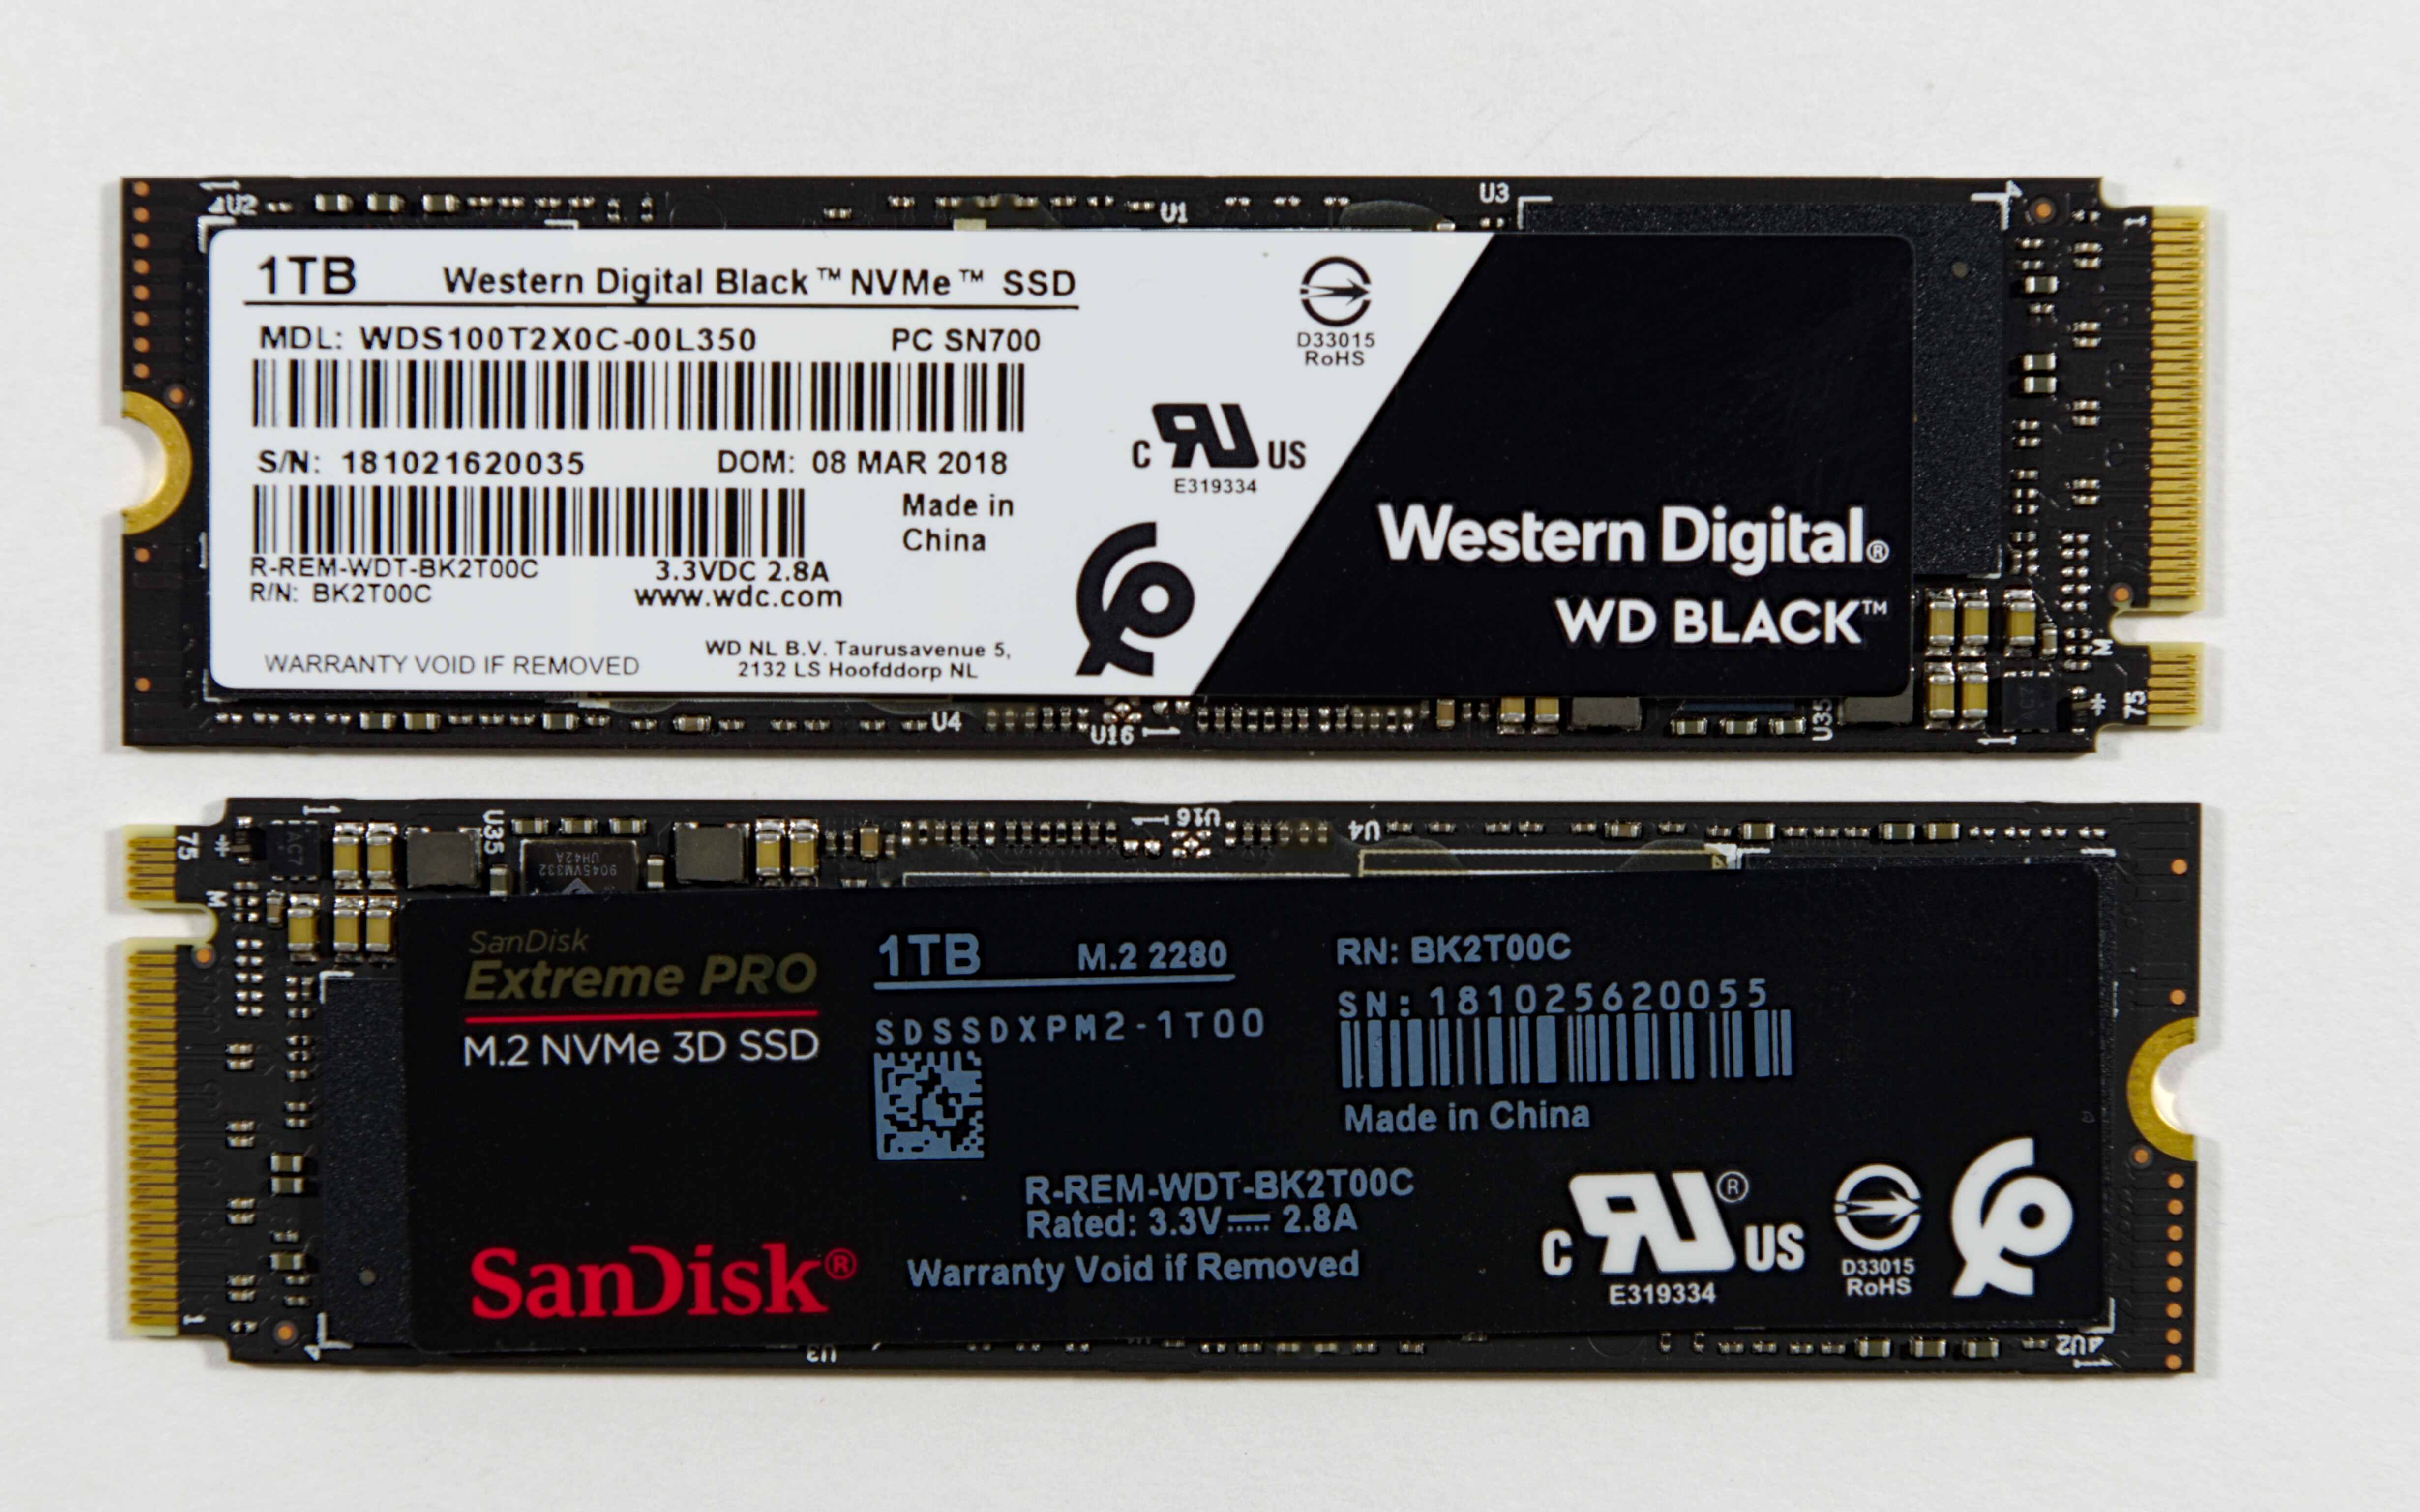 Conclusion The Western Digital Wd Black 3d Nand Ssd Review Evo Meets Its Match